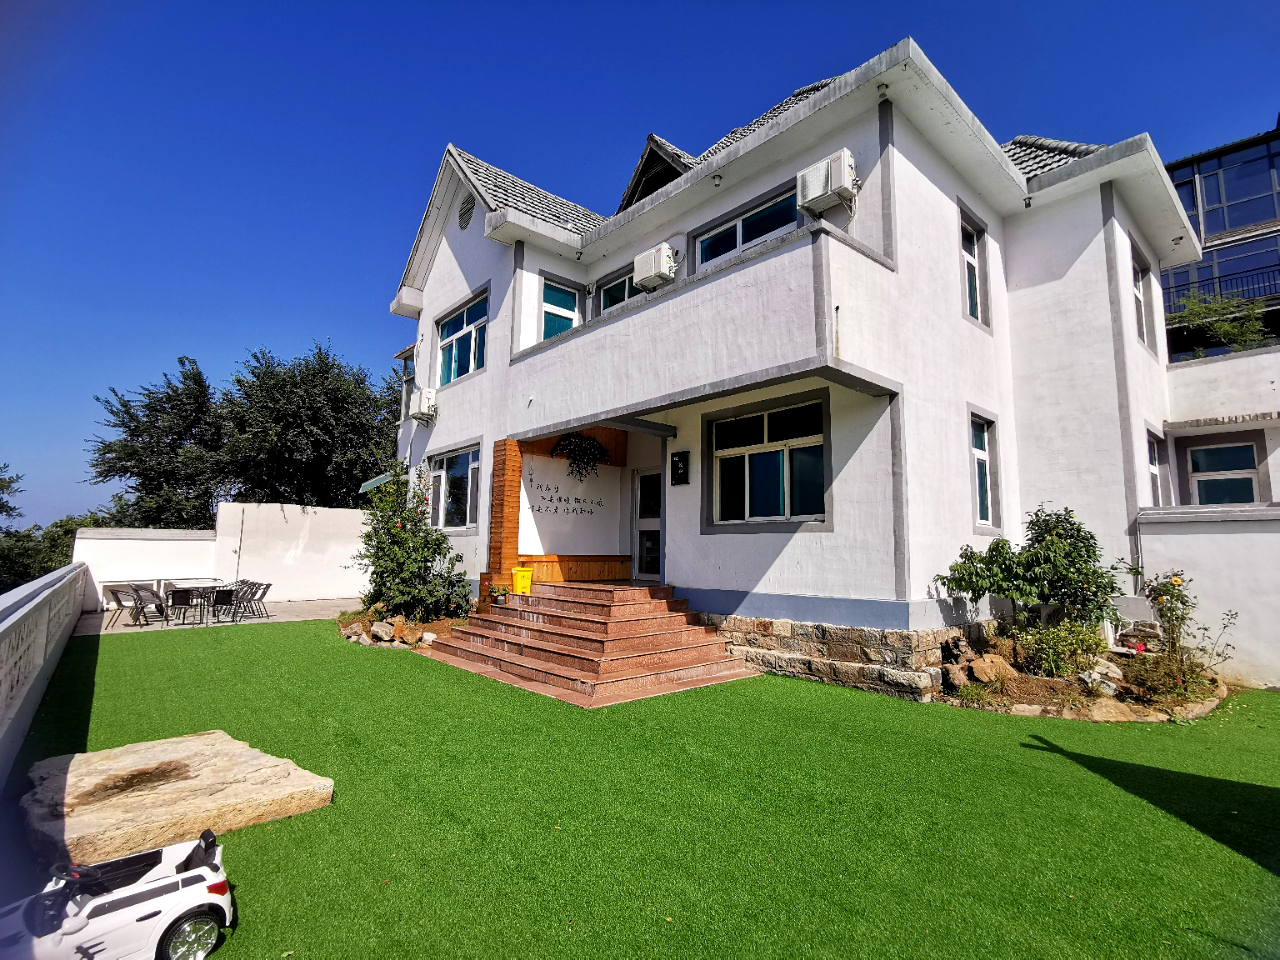 15-24 of the 33 Questions to Ask Before Buying Artificial Lawn